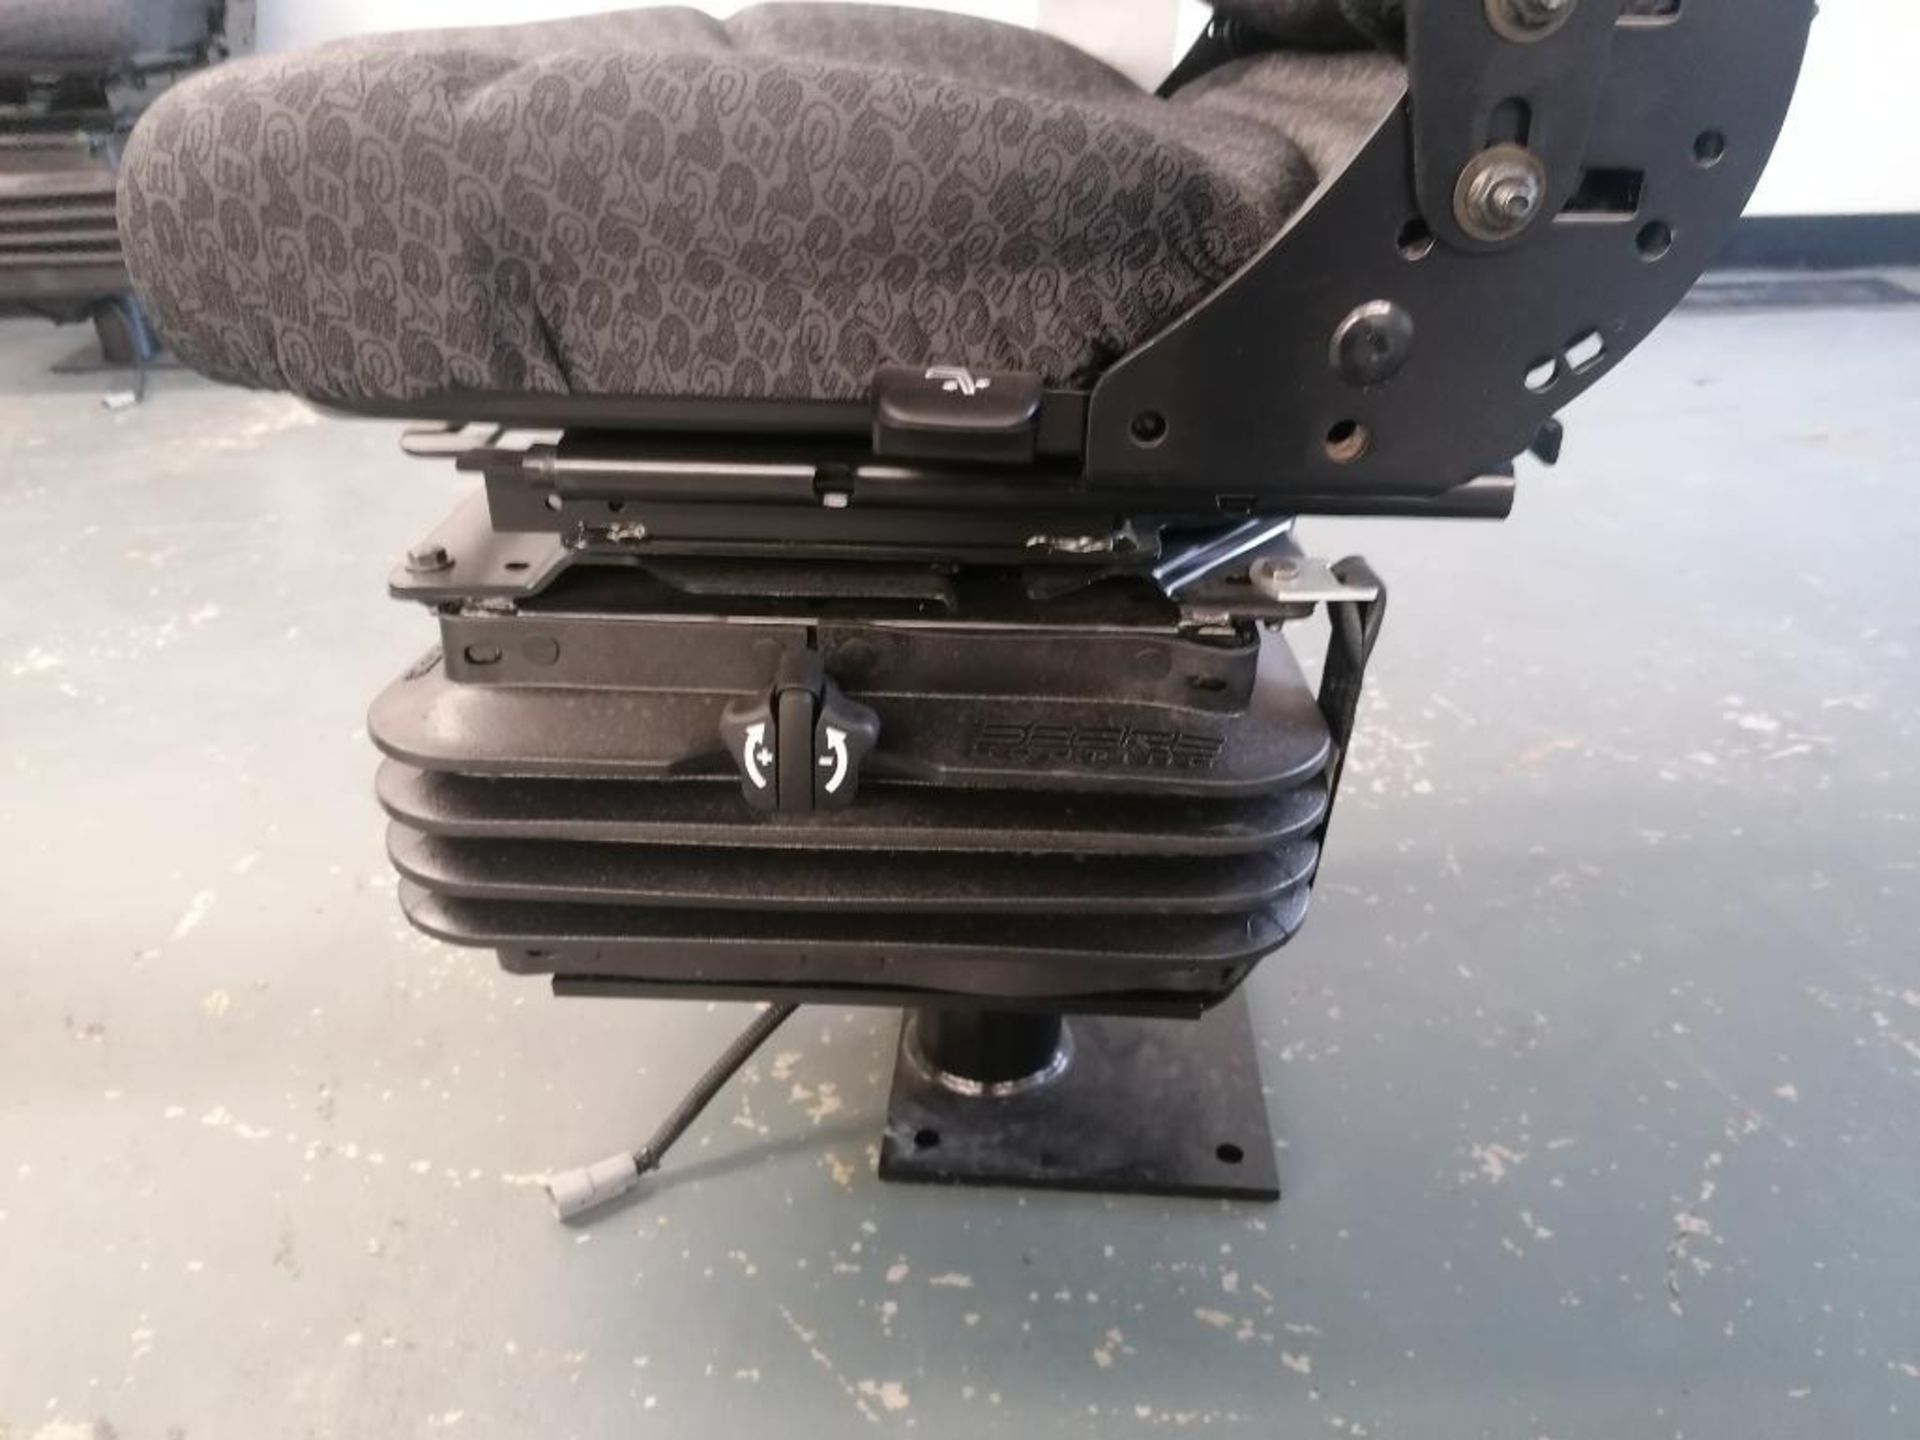 CNH Air Suspension Seat for Case Backhoe, Serial #007091742360. Located in Mt. Pleasant, IA. - Image 7 of 9